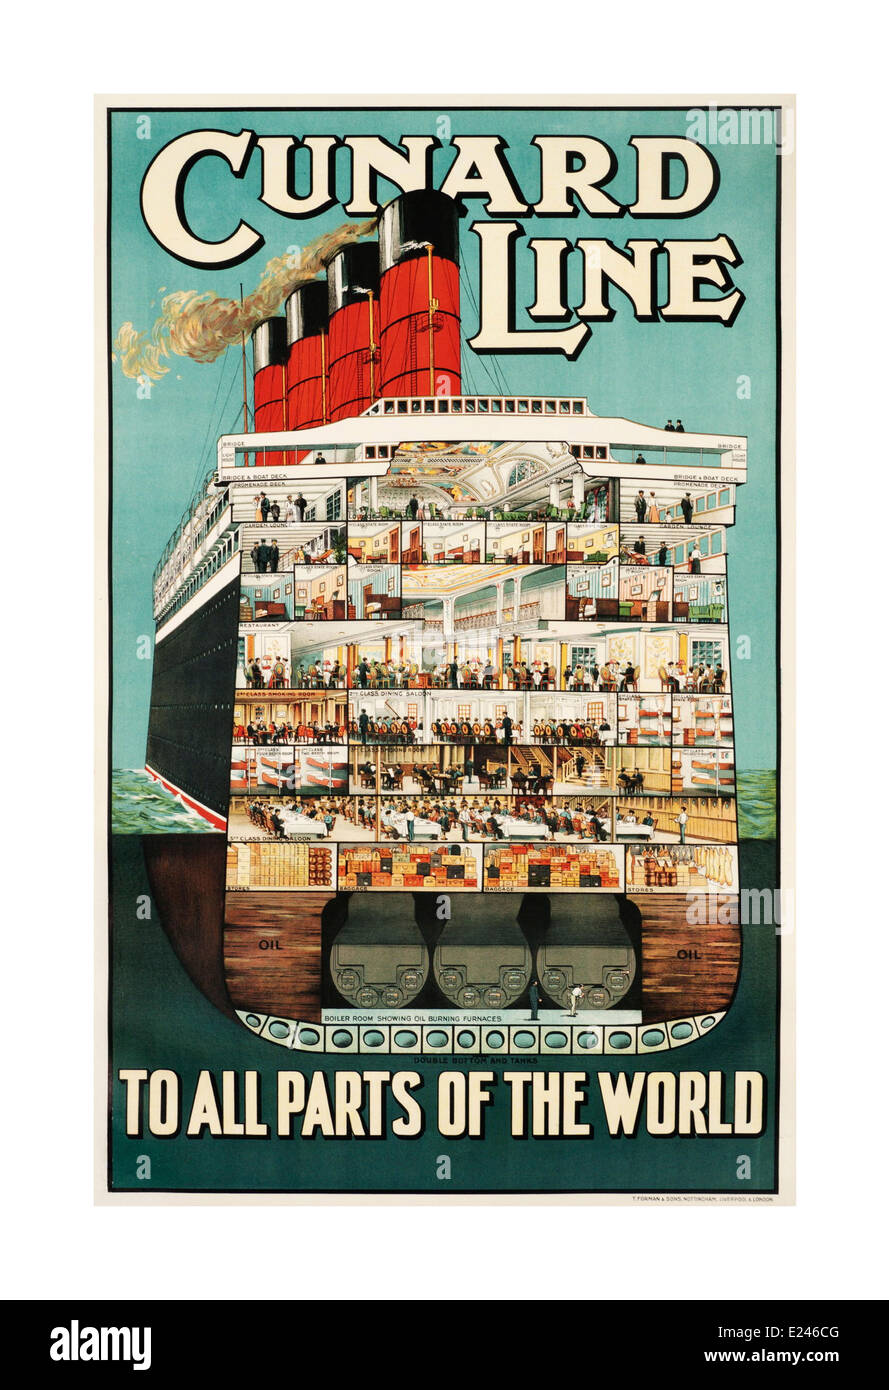 'CUNARD LINE to all parts of the world' 1930's vintage cruise ship poster for Cunard Line showing internal cross section of a luxury cruise ship Stock Photo